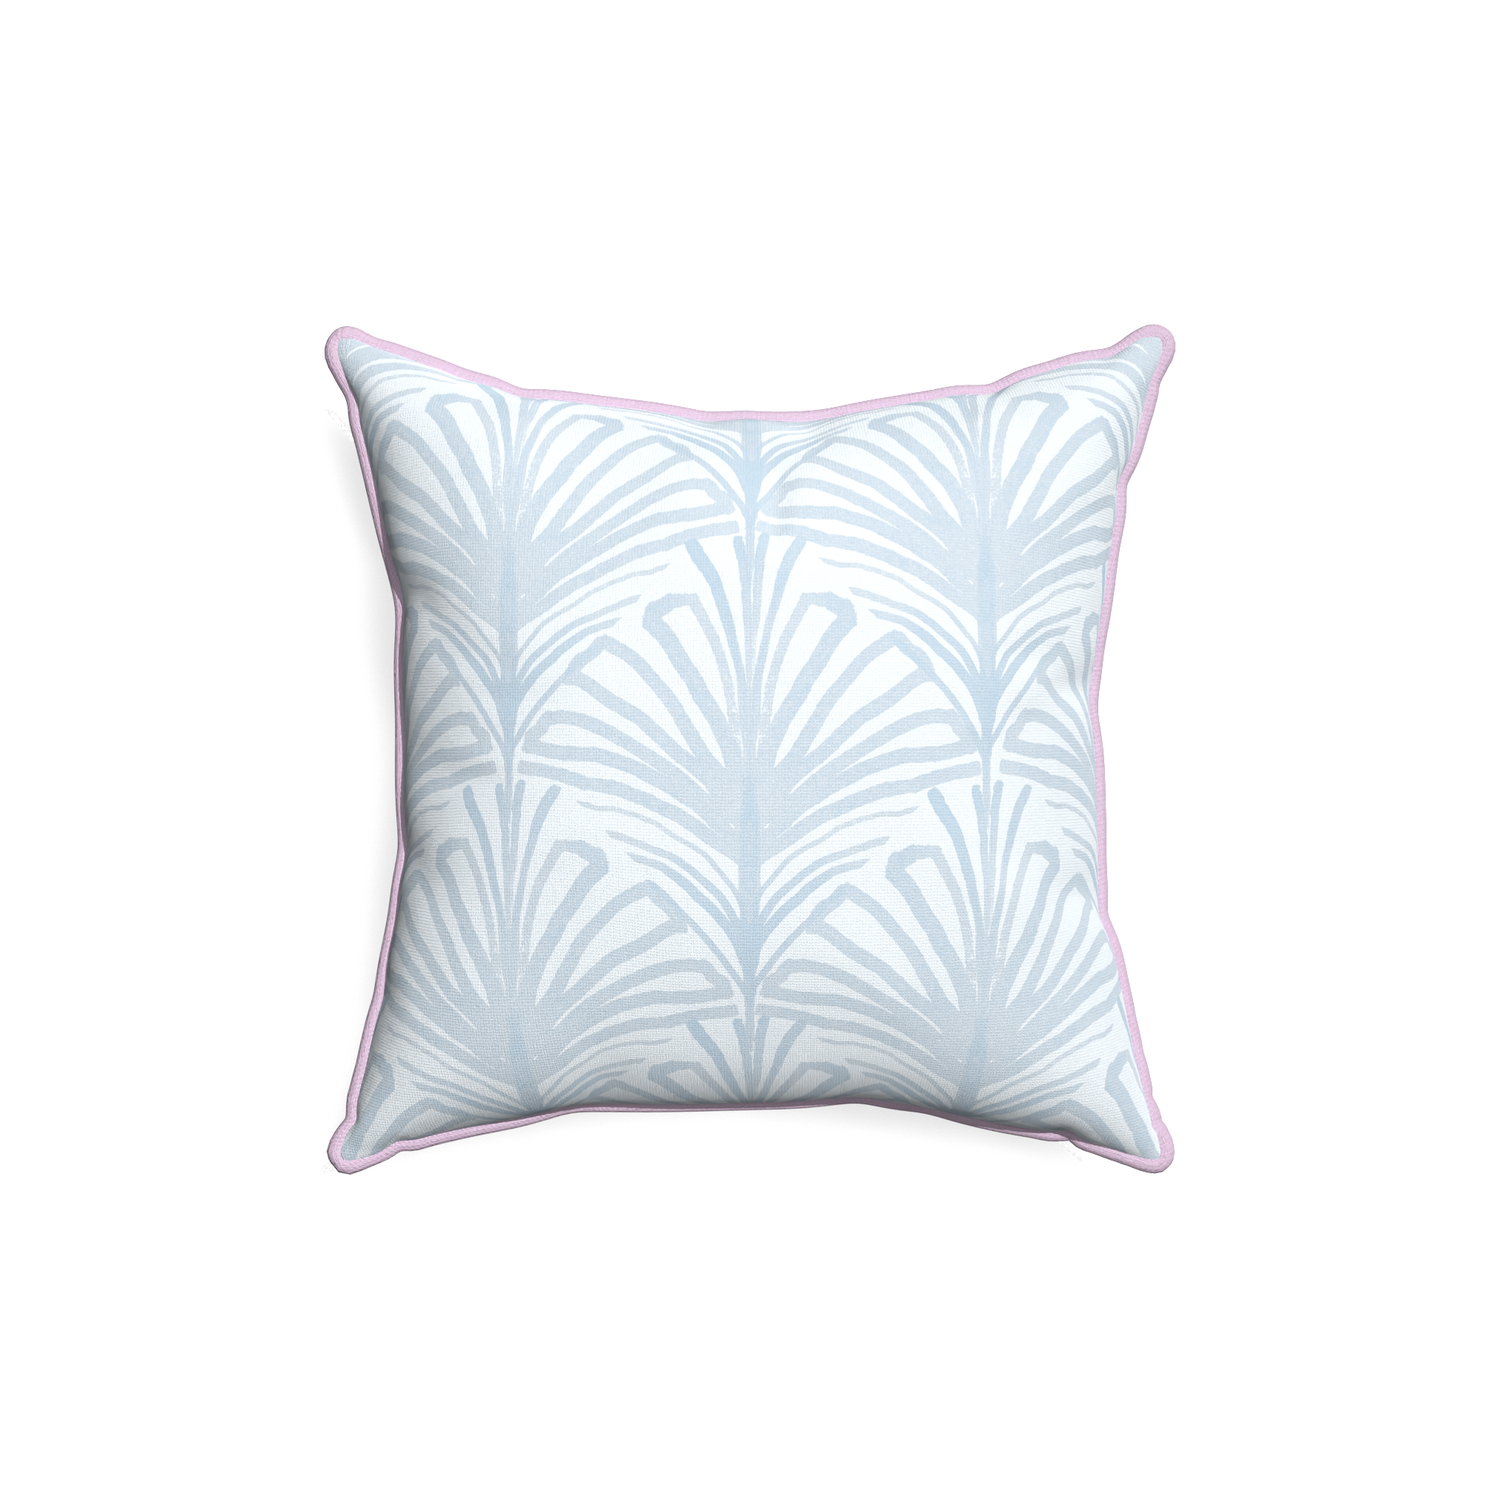 18-square suzy sky custom pillow with l piping on white background